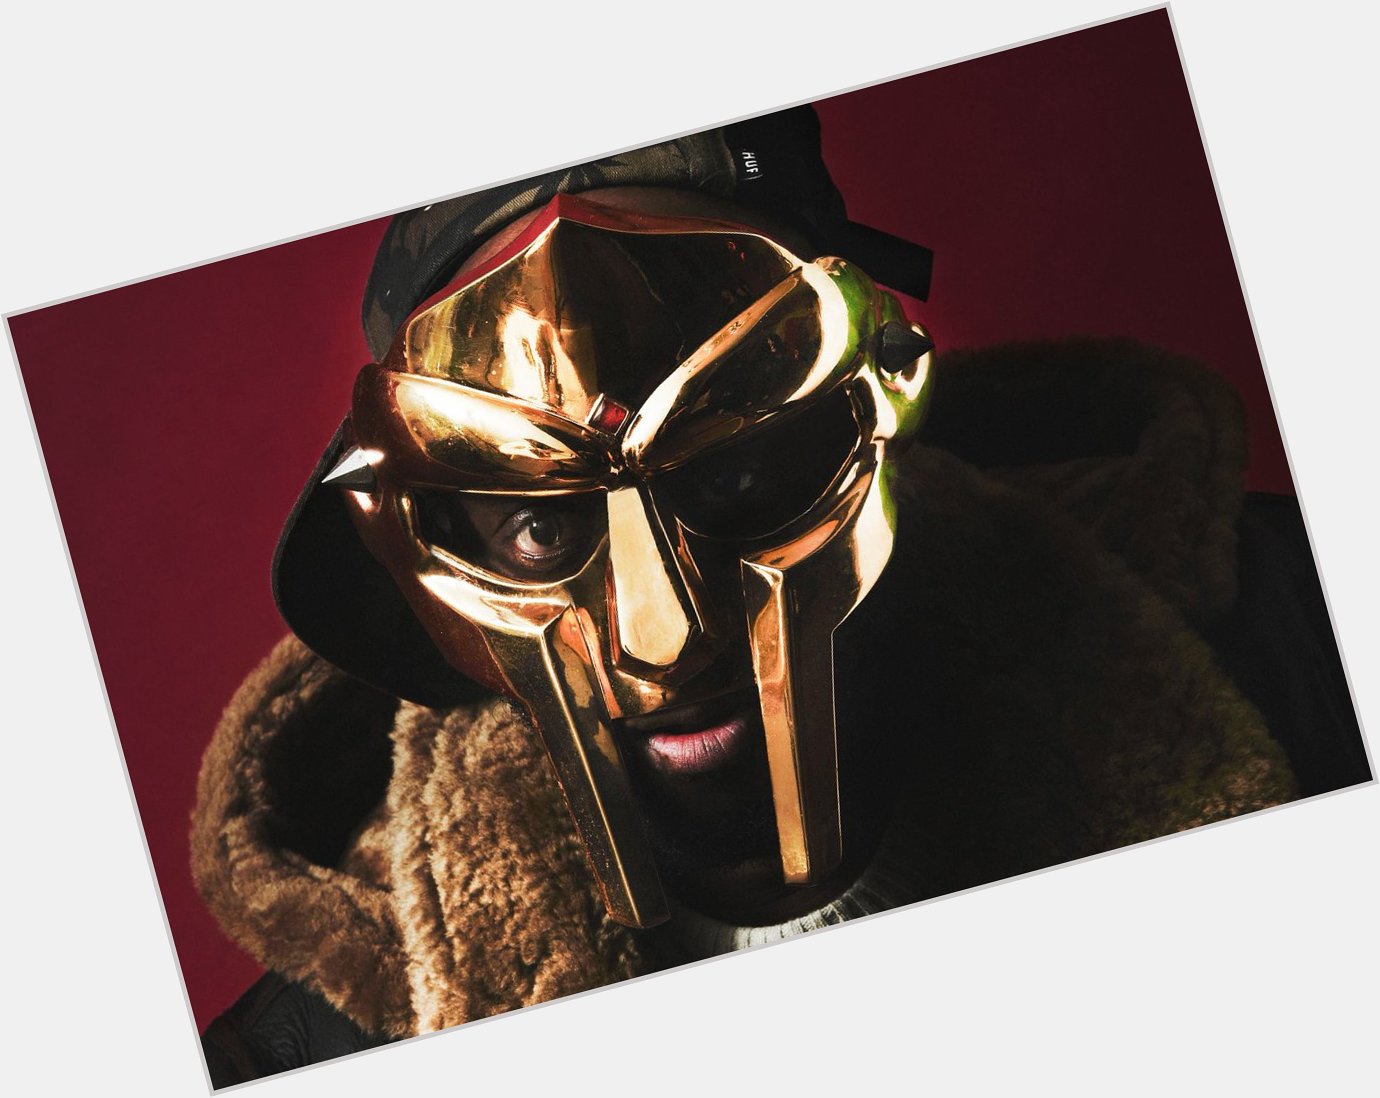 MF DOOM would\ve turned 50 today. Happy birthday and rest well king. 